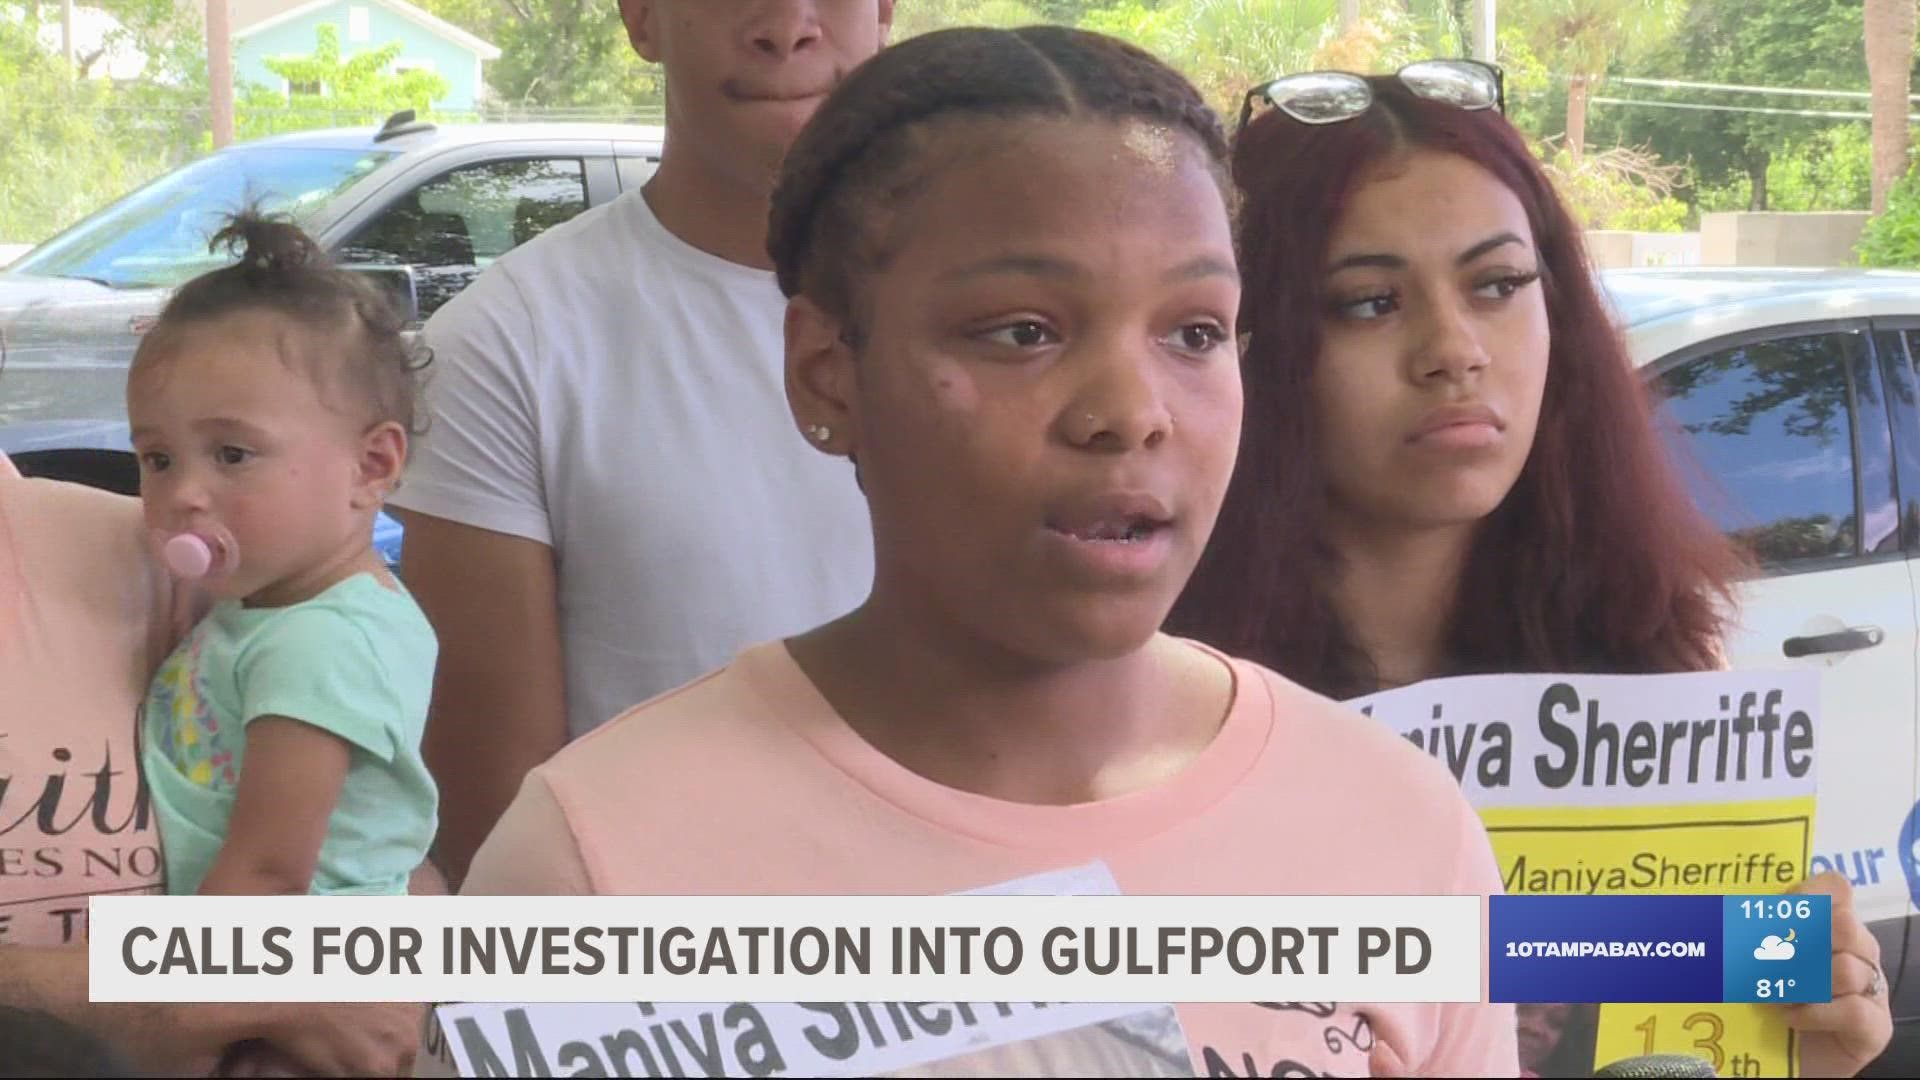 Gulfport Police are aware of the incident and conducting an internal investigation.